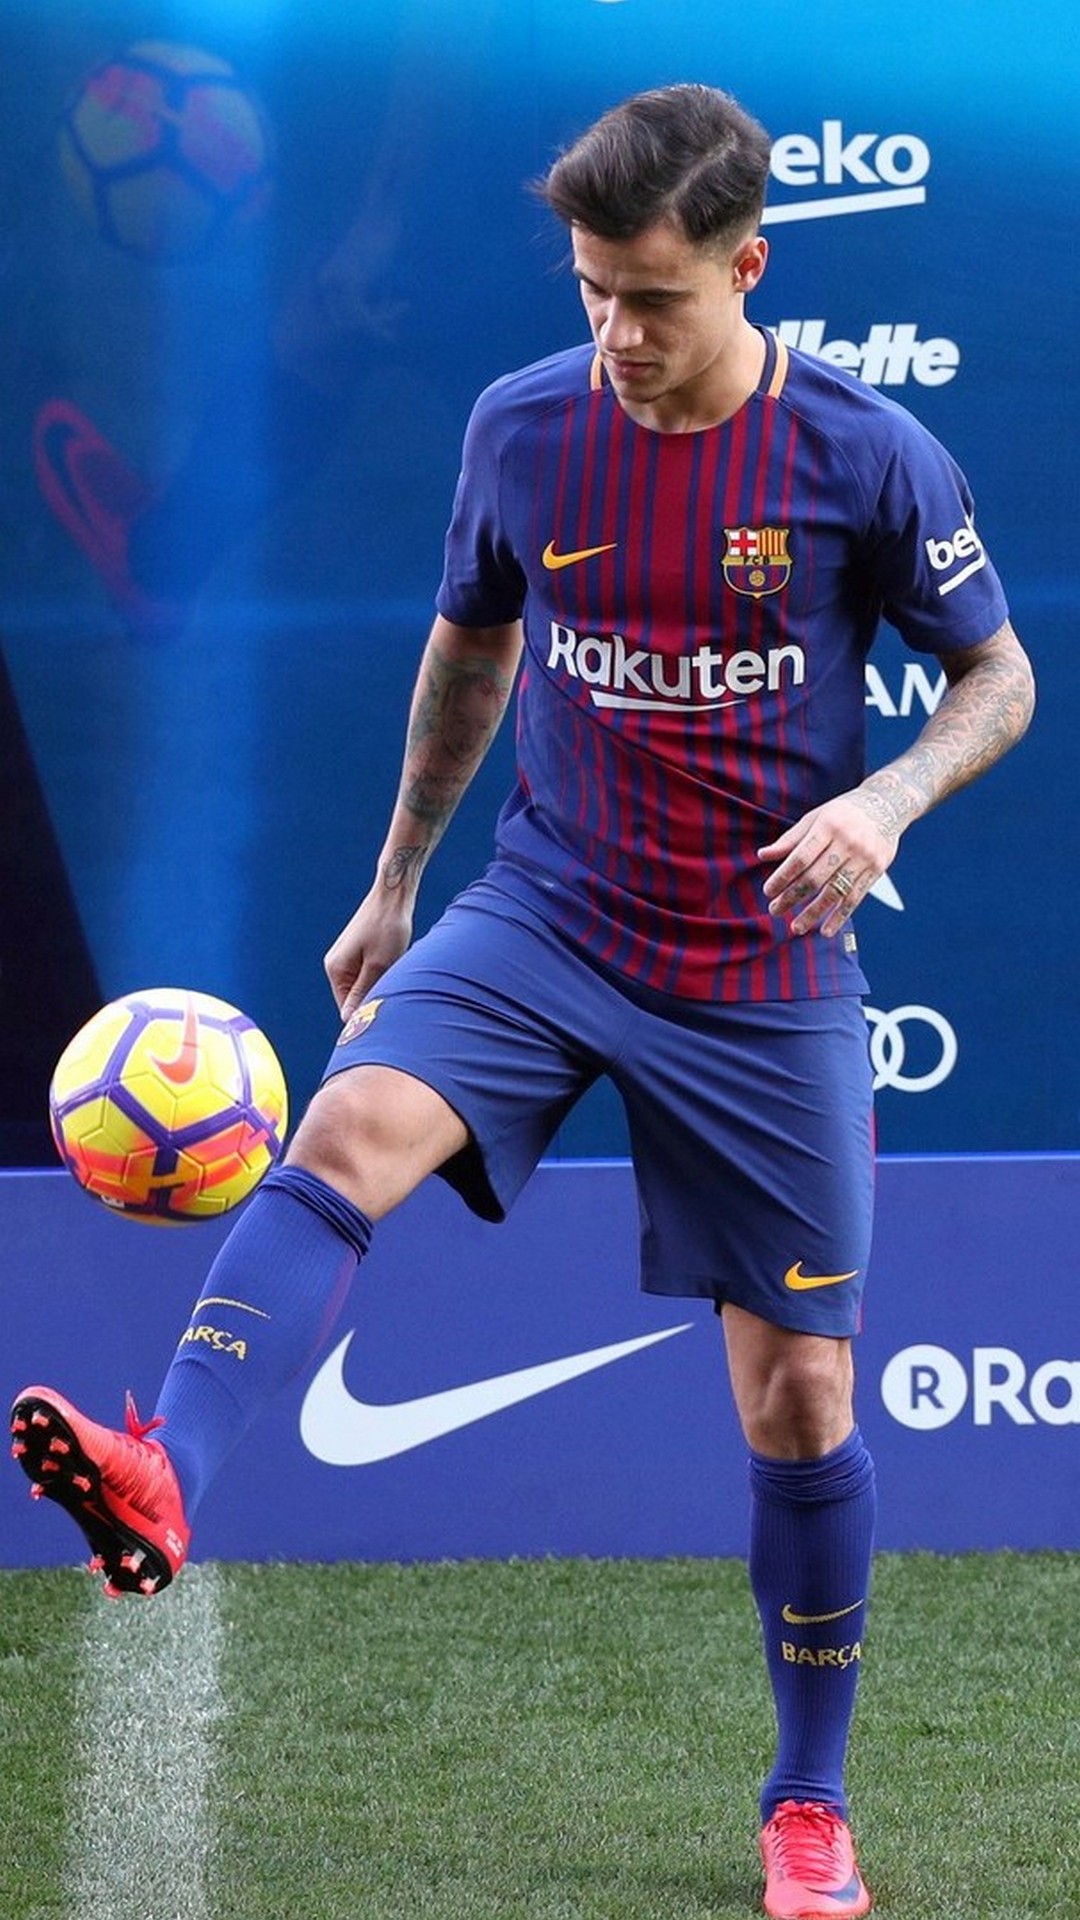 coutinho wallpaper,sports,soccer player,ball game,football player,soccer